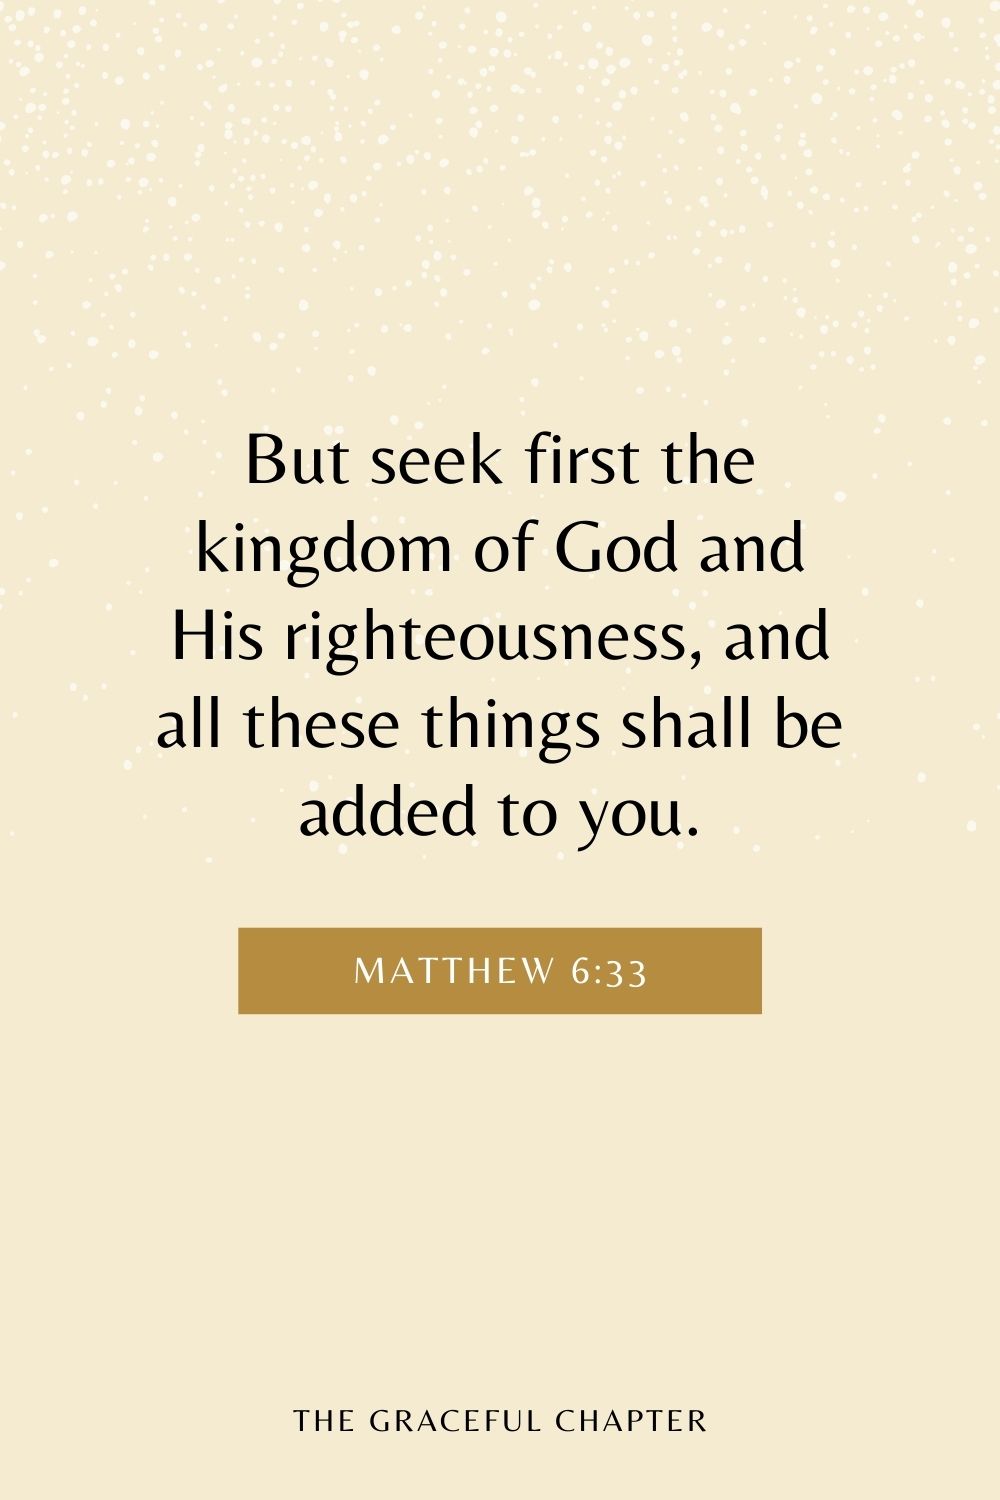 But seek first the kingdom of God and His righteousness, and all these things shall be added to you. Matthew 6:33